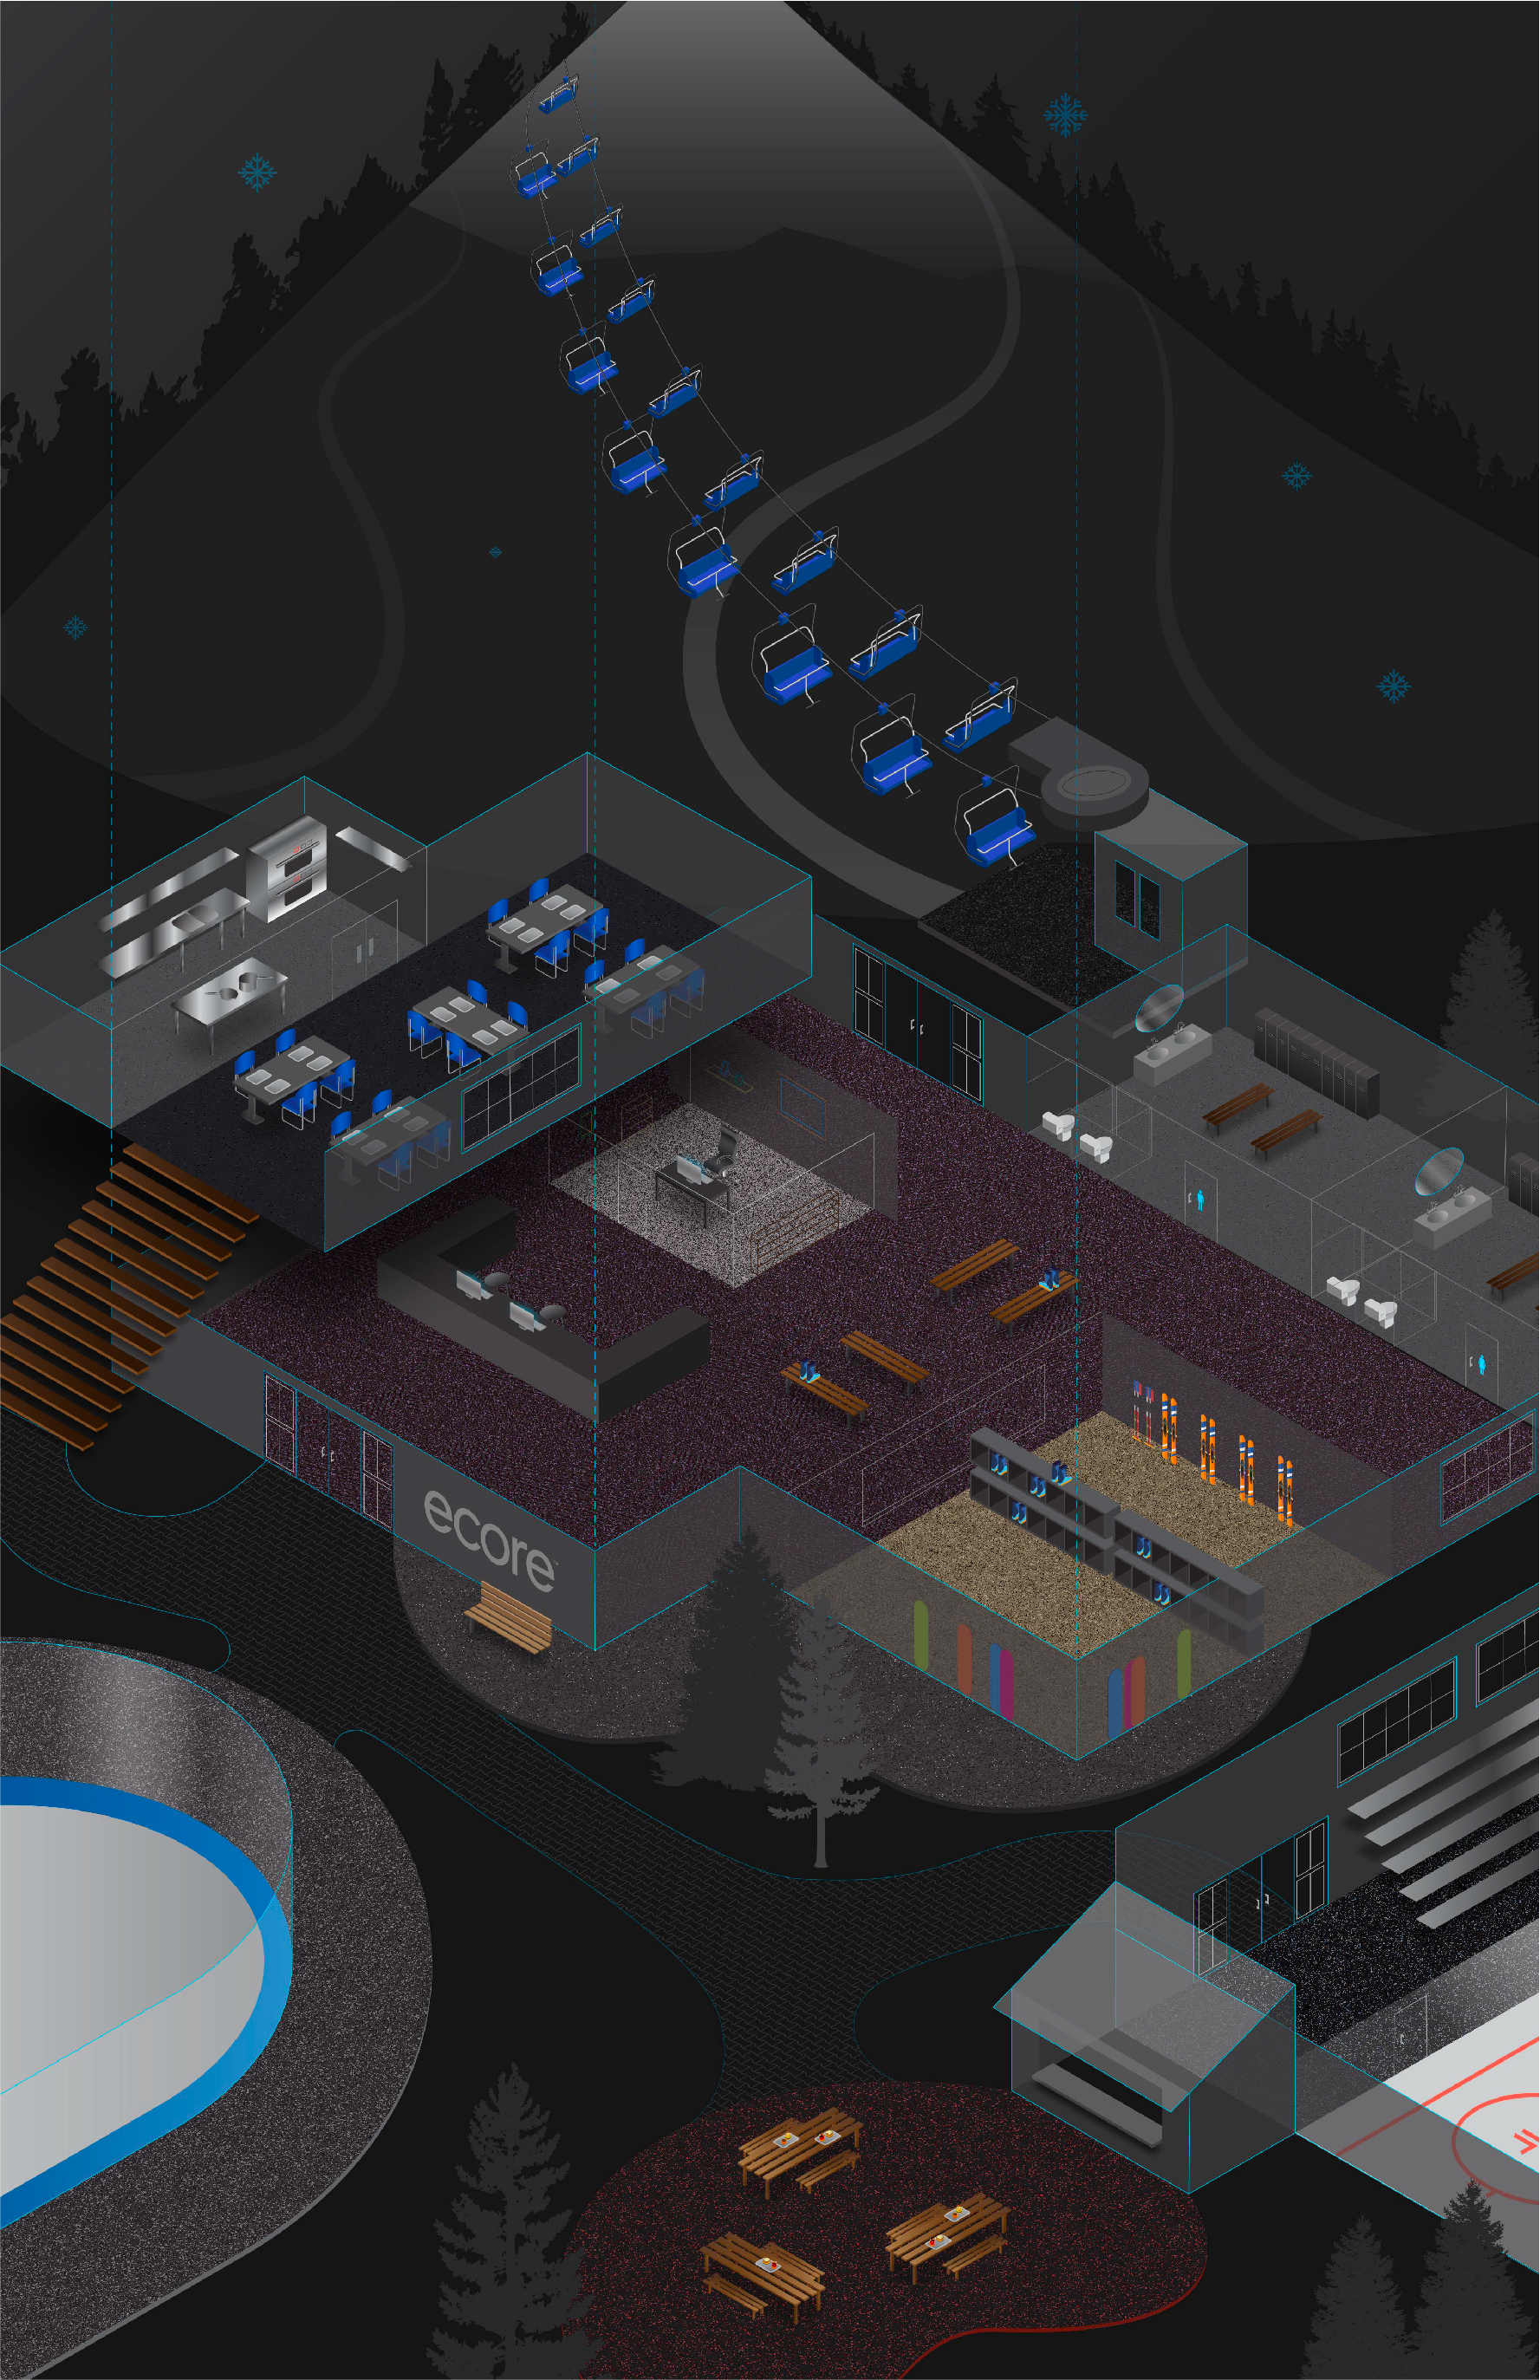 Blueprint of a winter sports facility featuring Ecore flooring options in each room or space